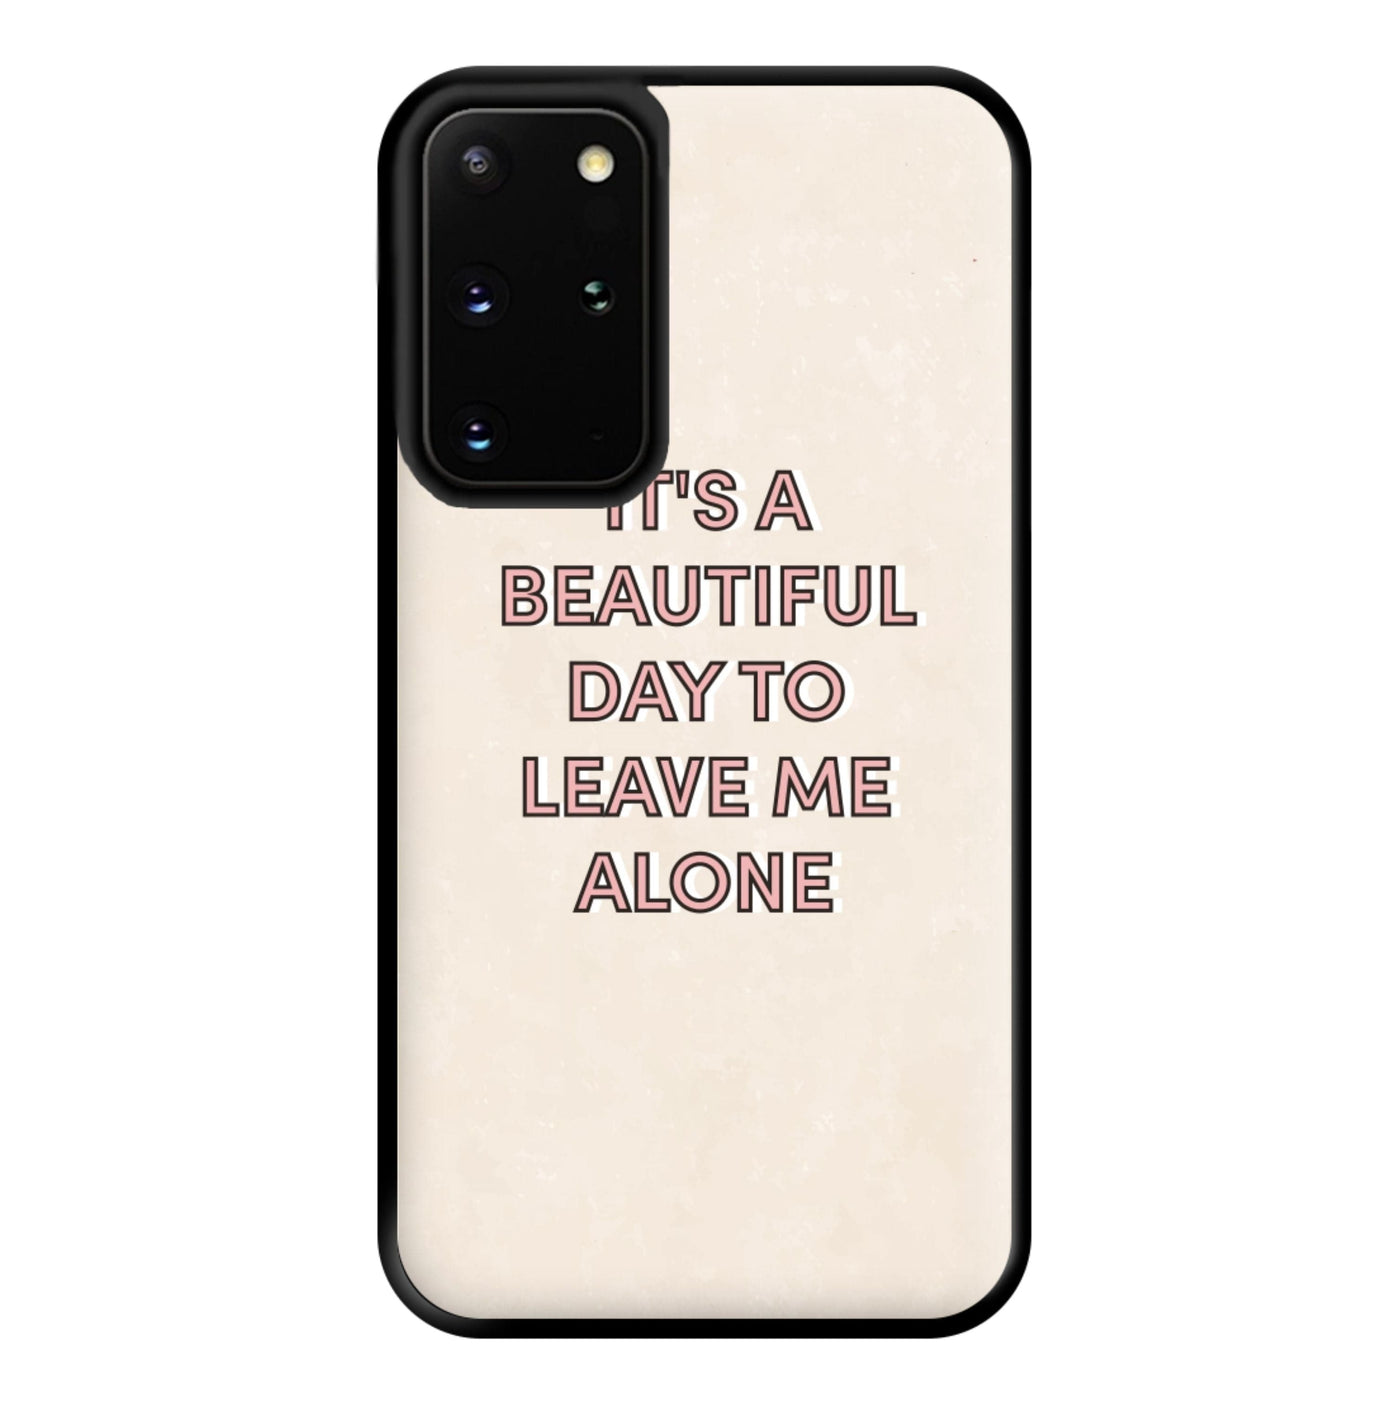 It's A Beautiful Day To Leave Me Alone Phone Case